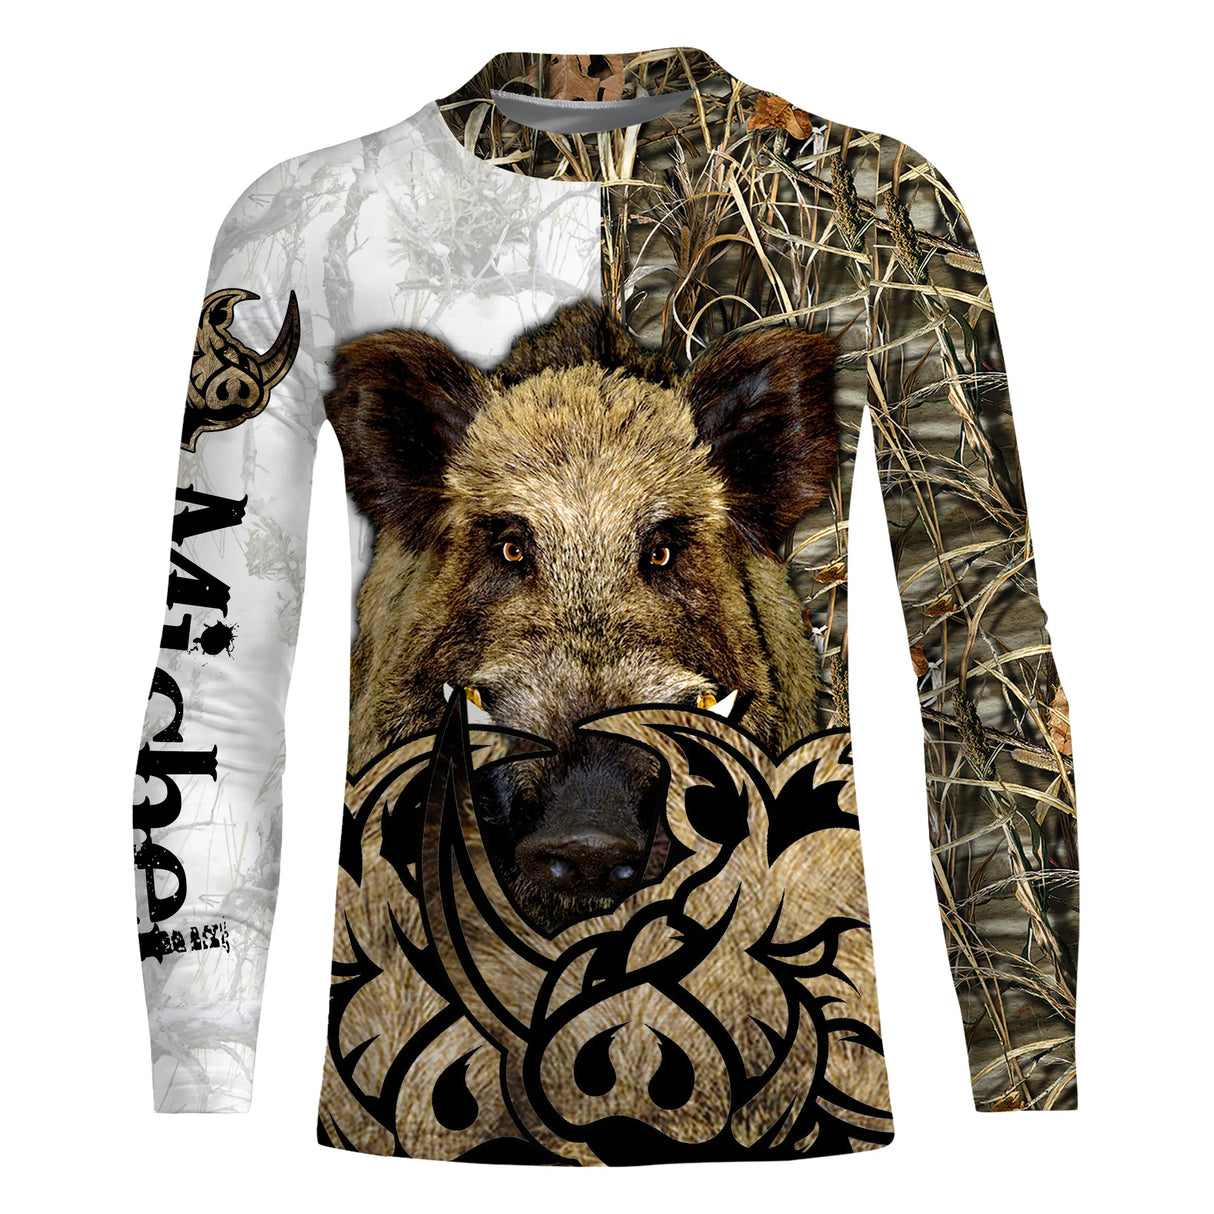 Personalized Camouflage T-shirt Wild Boar Hunting, Original Hunter Gift Idea - CT12082222